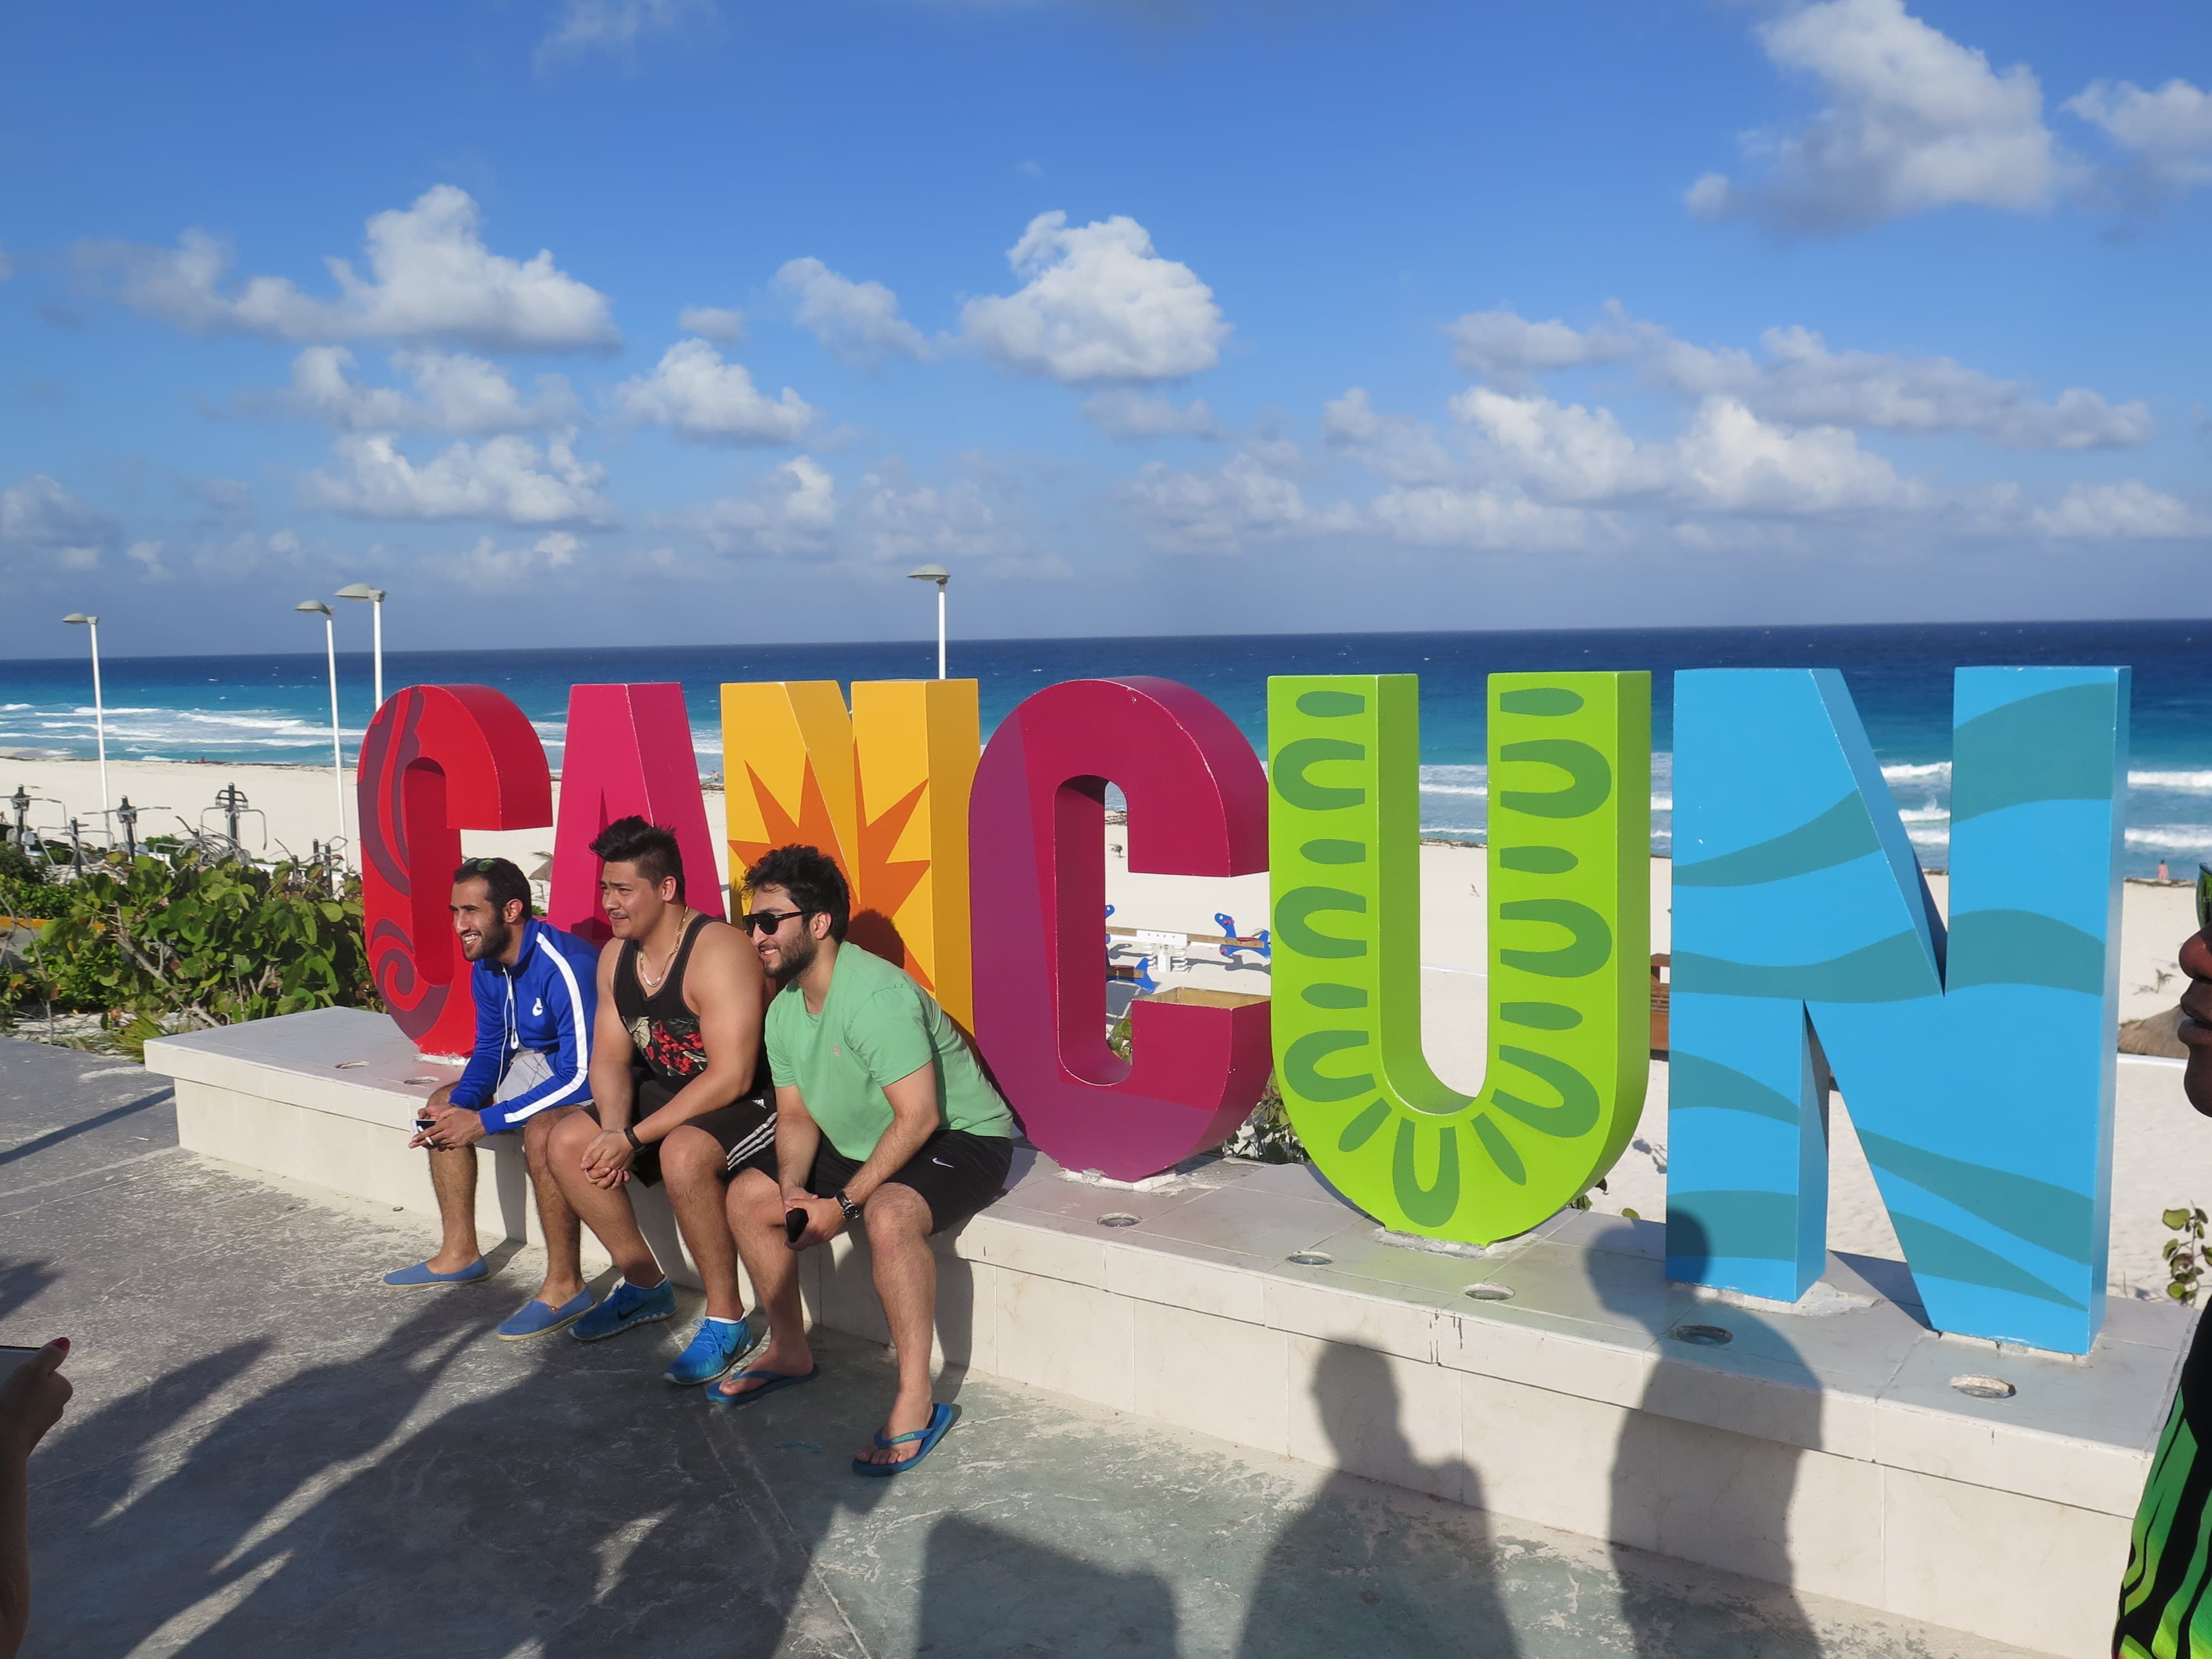 guys taking photos by cancun sign